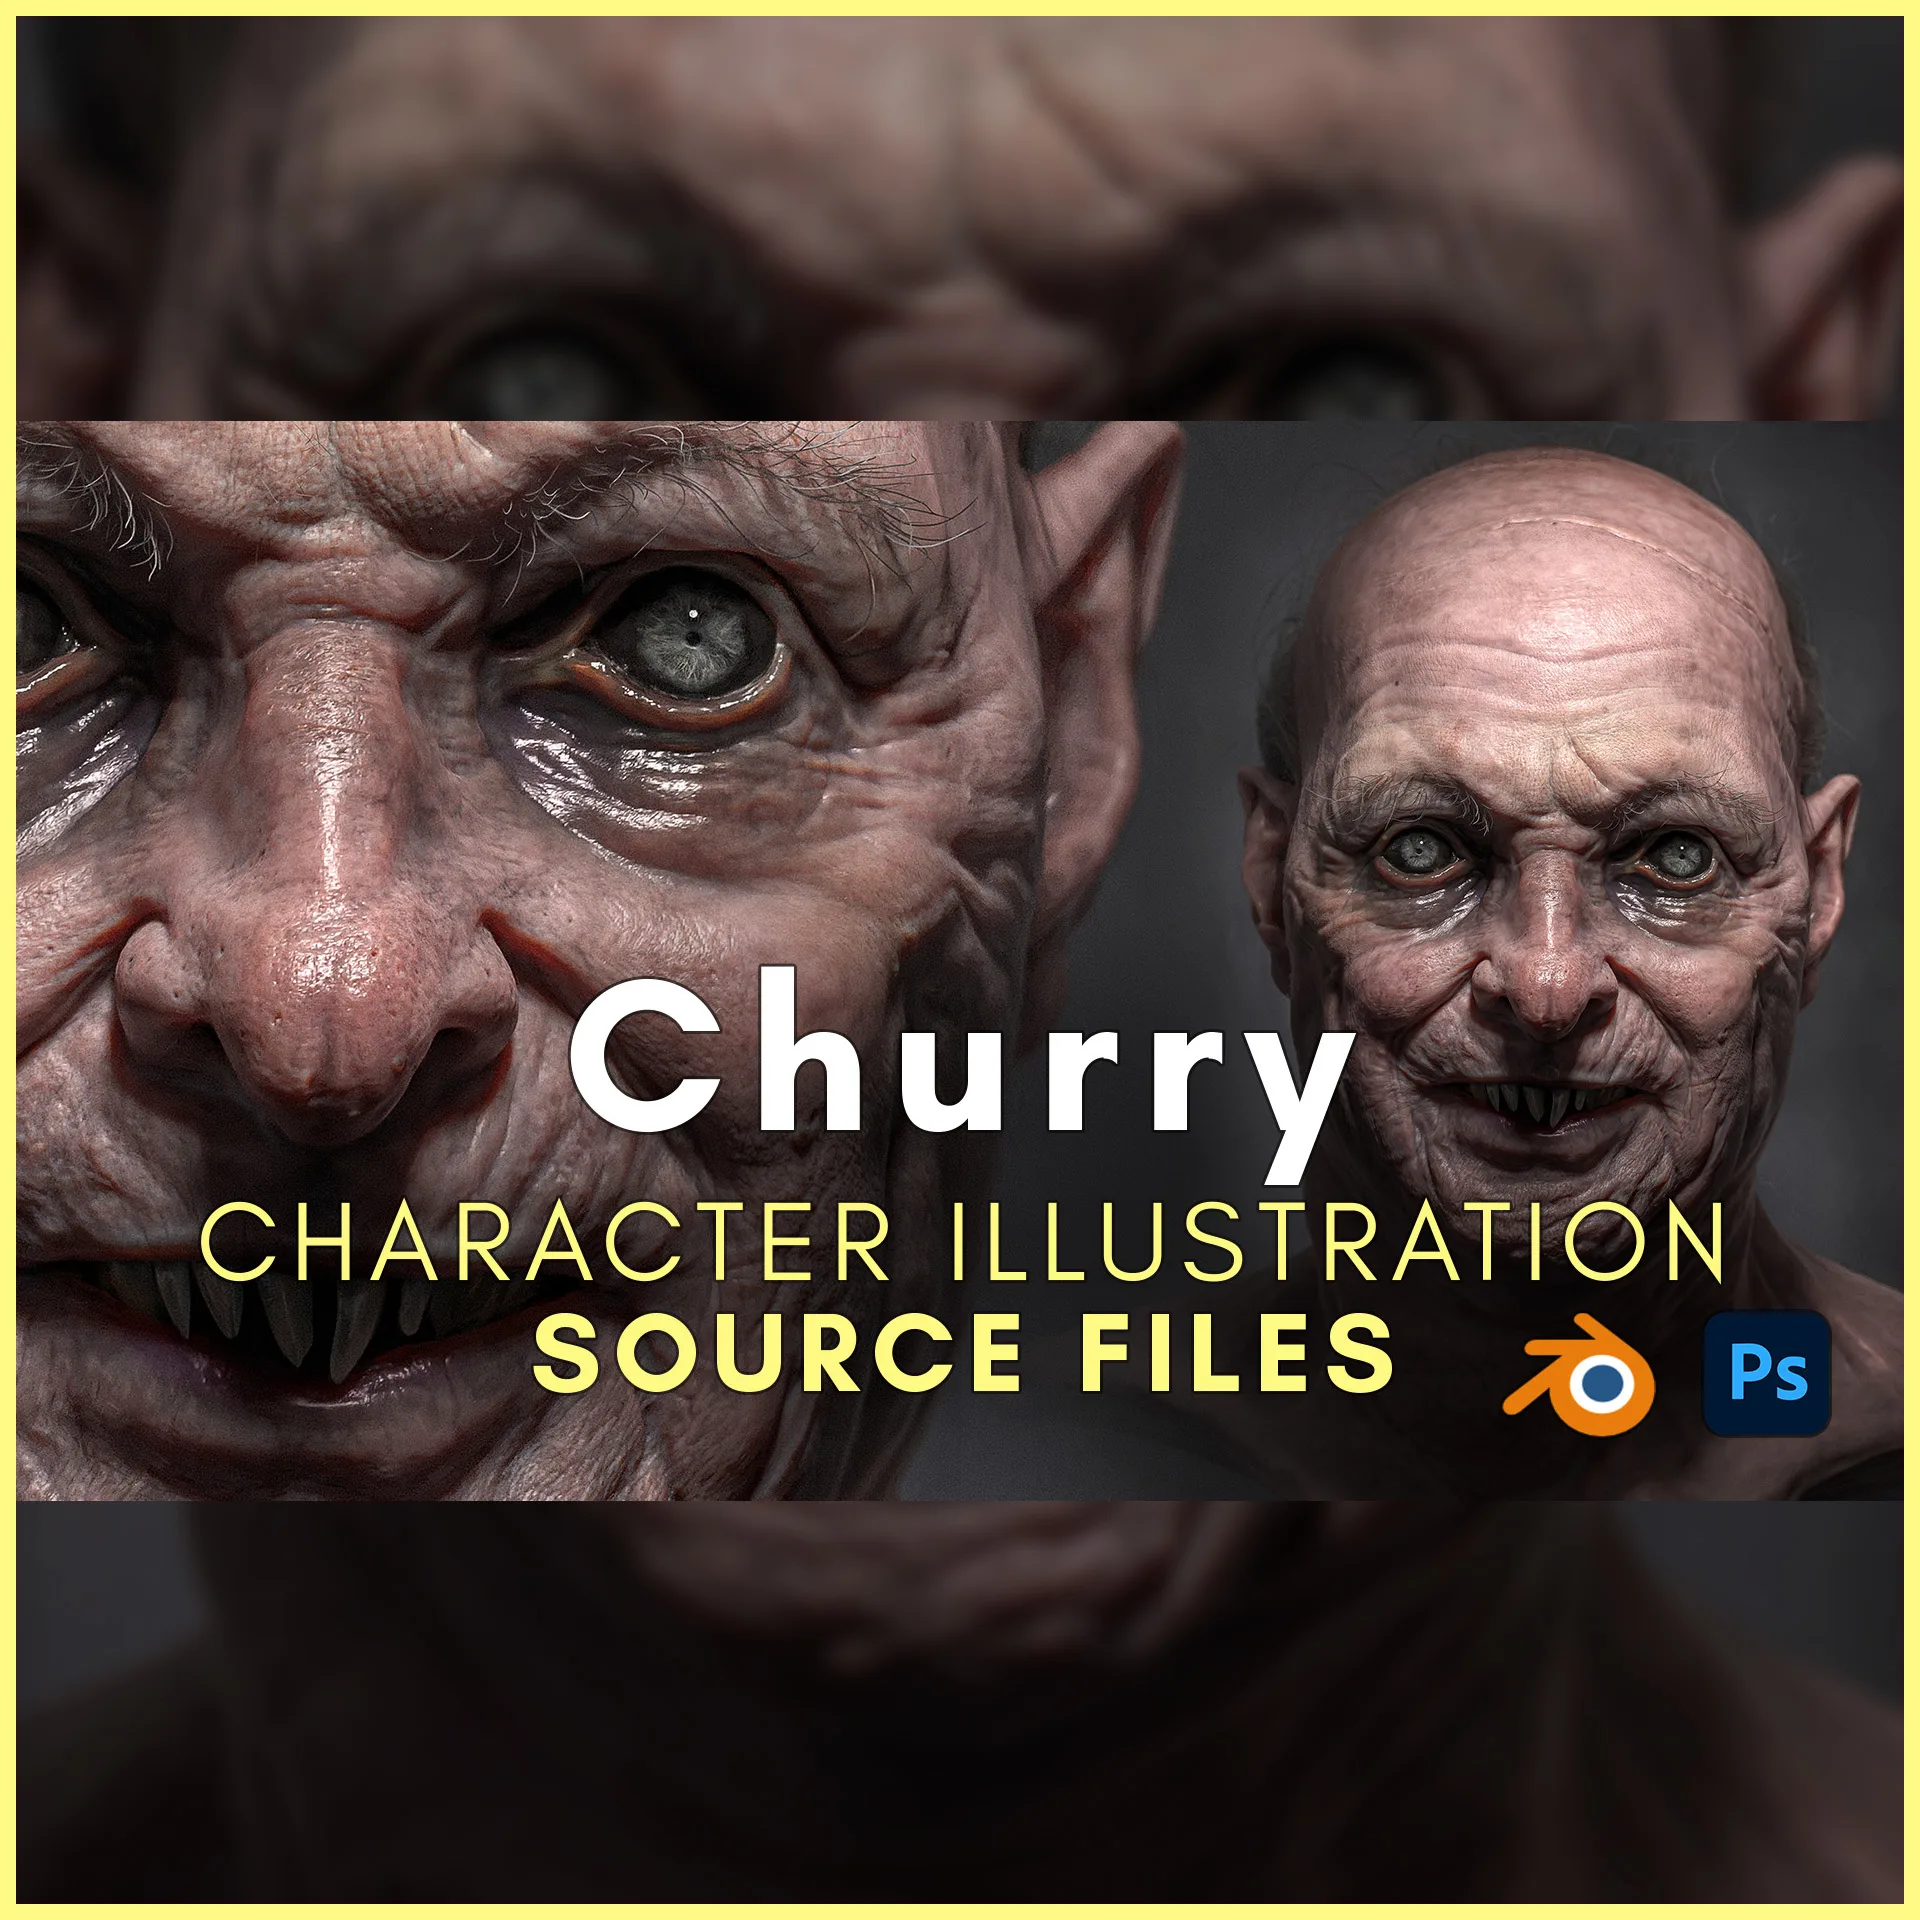 Churry - Character Illustration Source Files